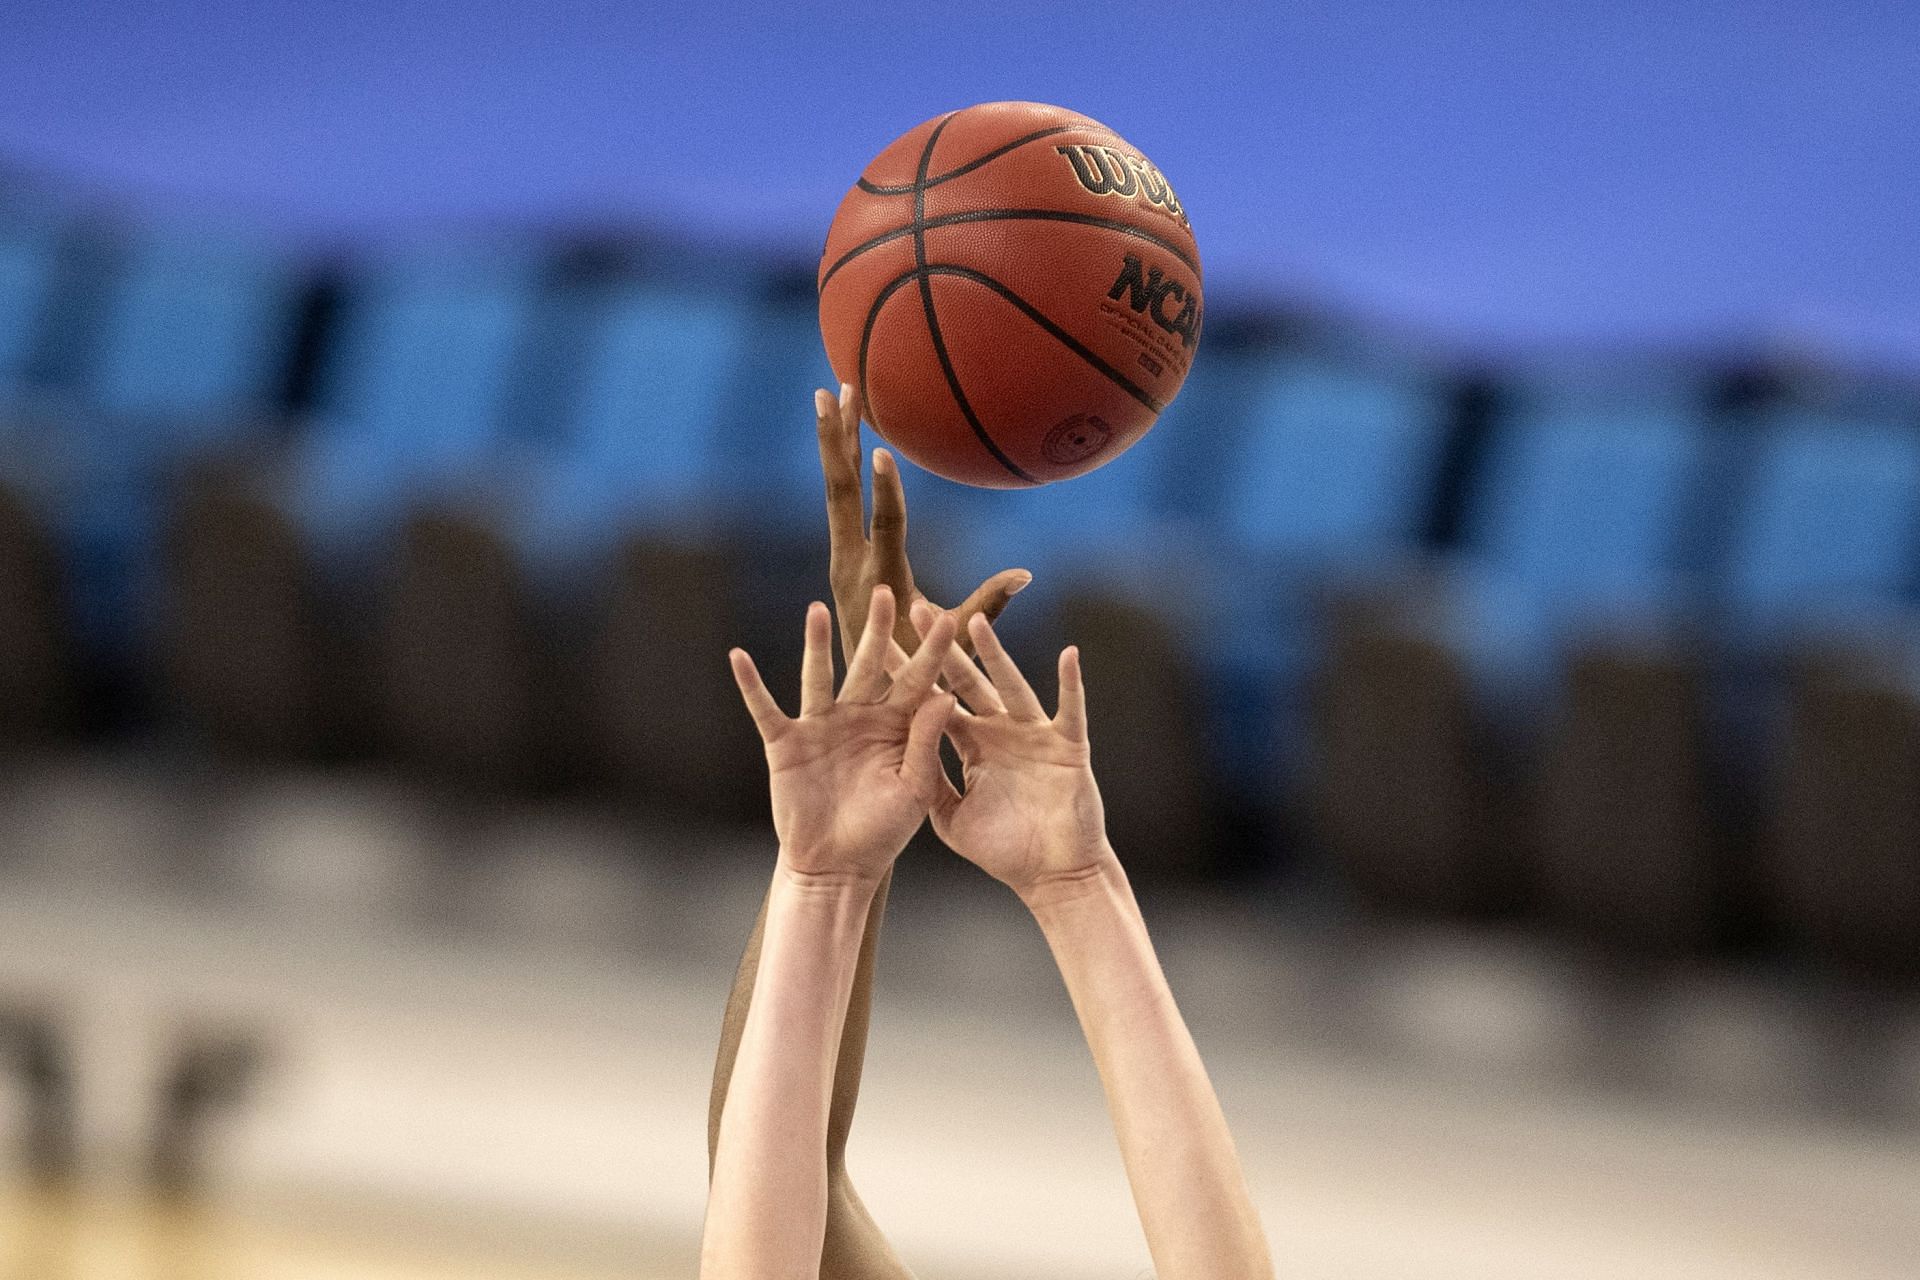 The Spain Park girls basketball team was denied of the championship trophy because of policy. [photo: AL.com]